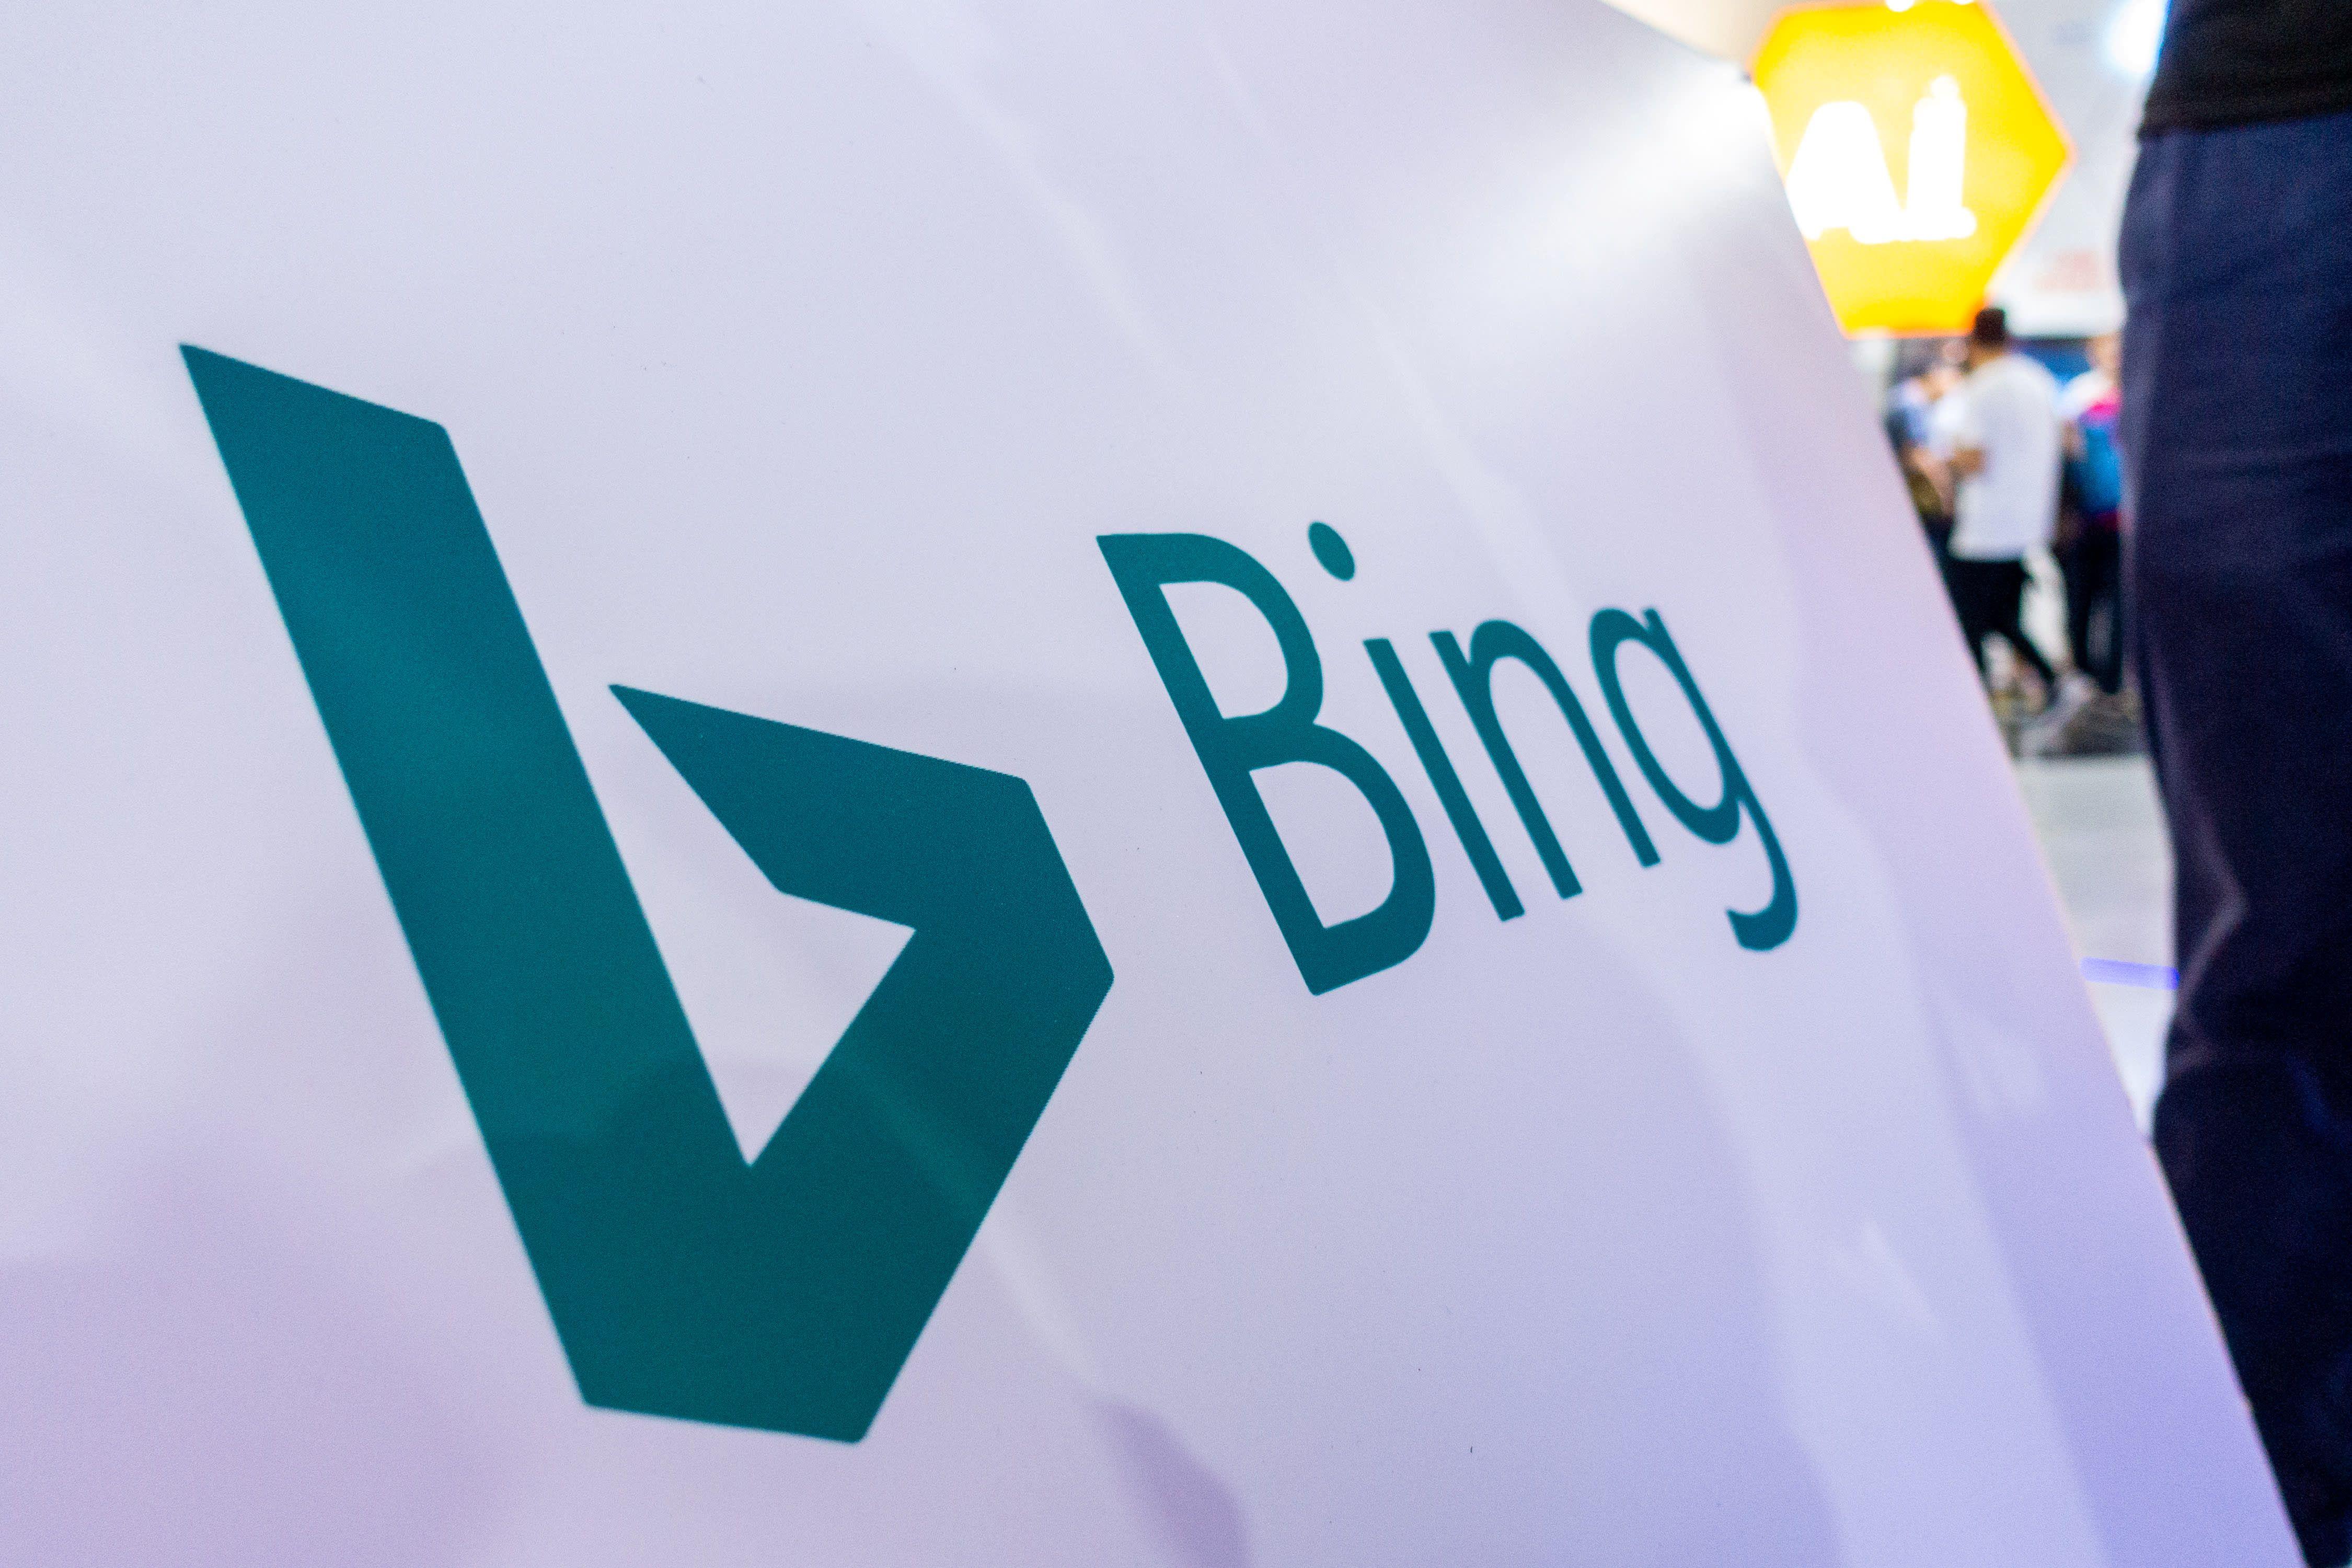 Bing Search Engine Logo - Microsoft says Bing search engine blocked in China - Nikkei Asian Review